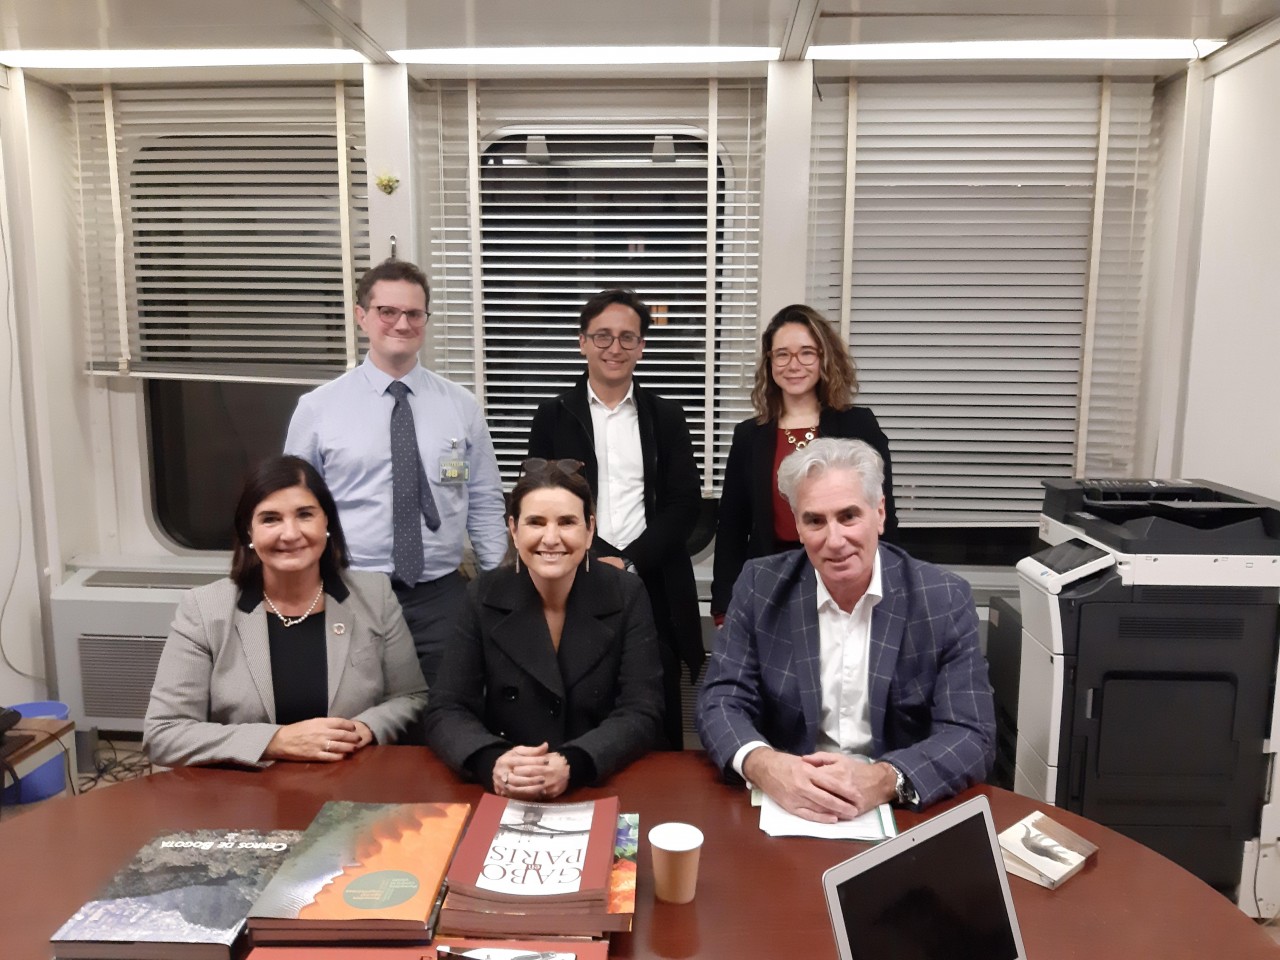 Former IFLA President GlÃ²ria PÃ©rez-SalmerÃ³n (front left), Secretary General Gerald Leitner (front right) and Policy & Advocacy Manager Stephen Wyber (back left) with CERLALC members.